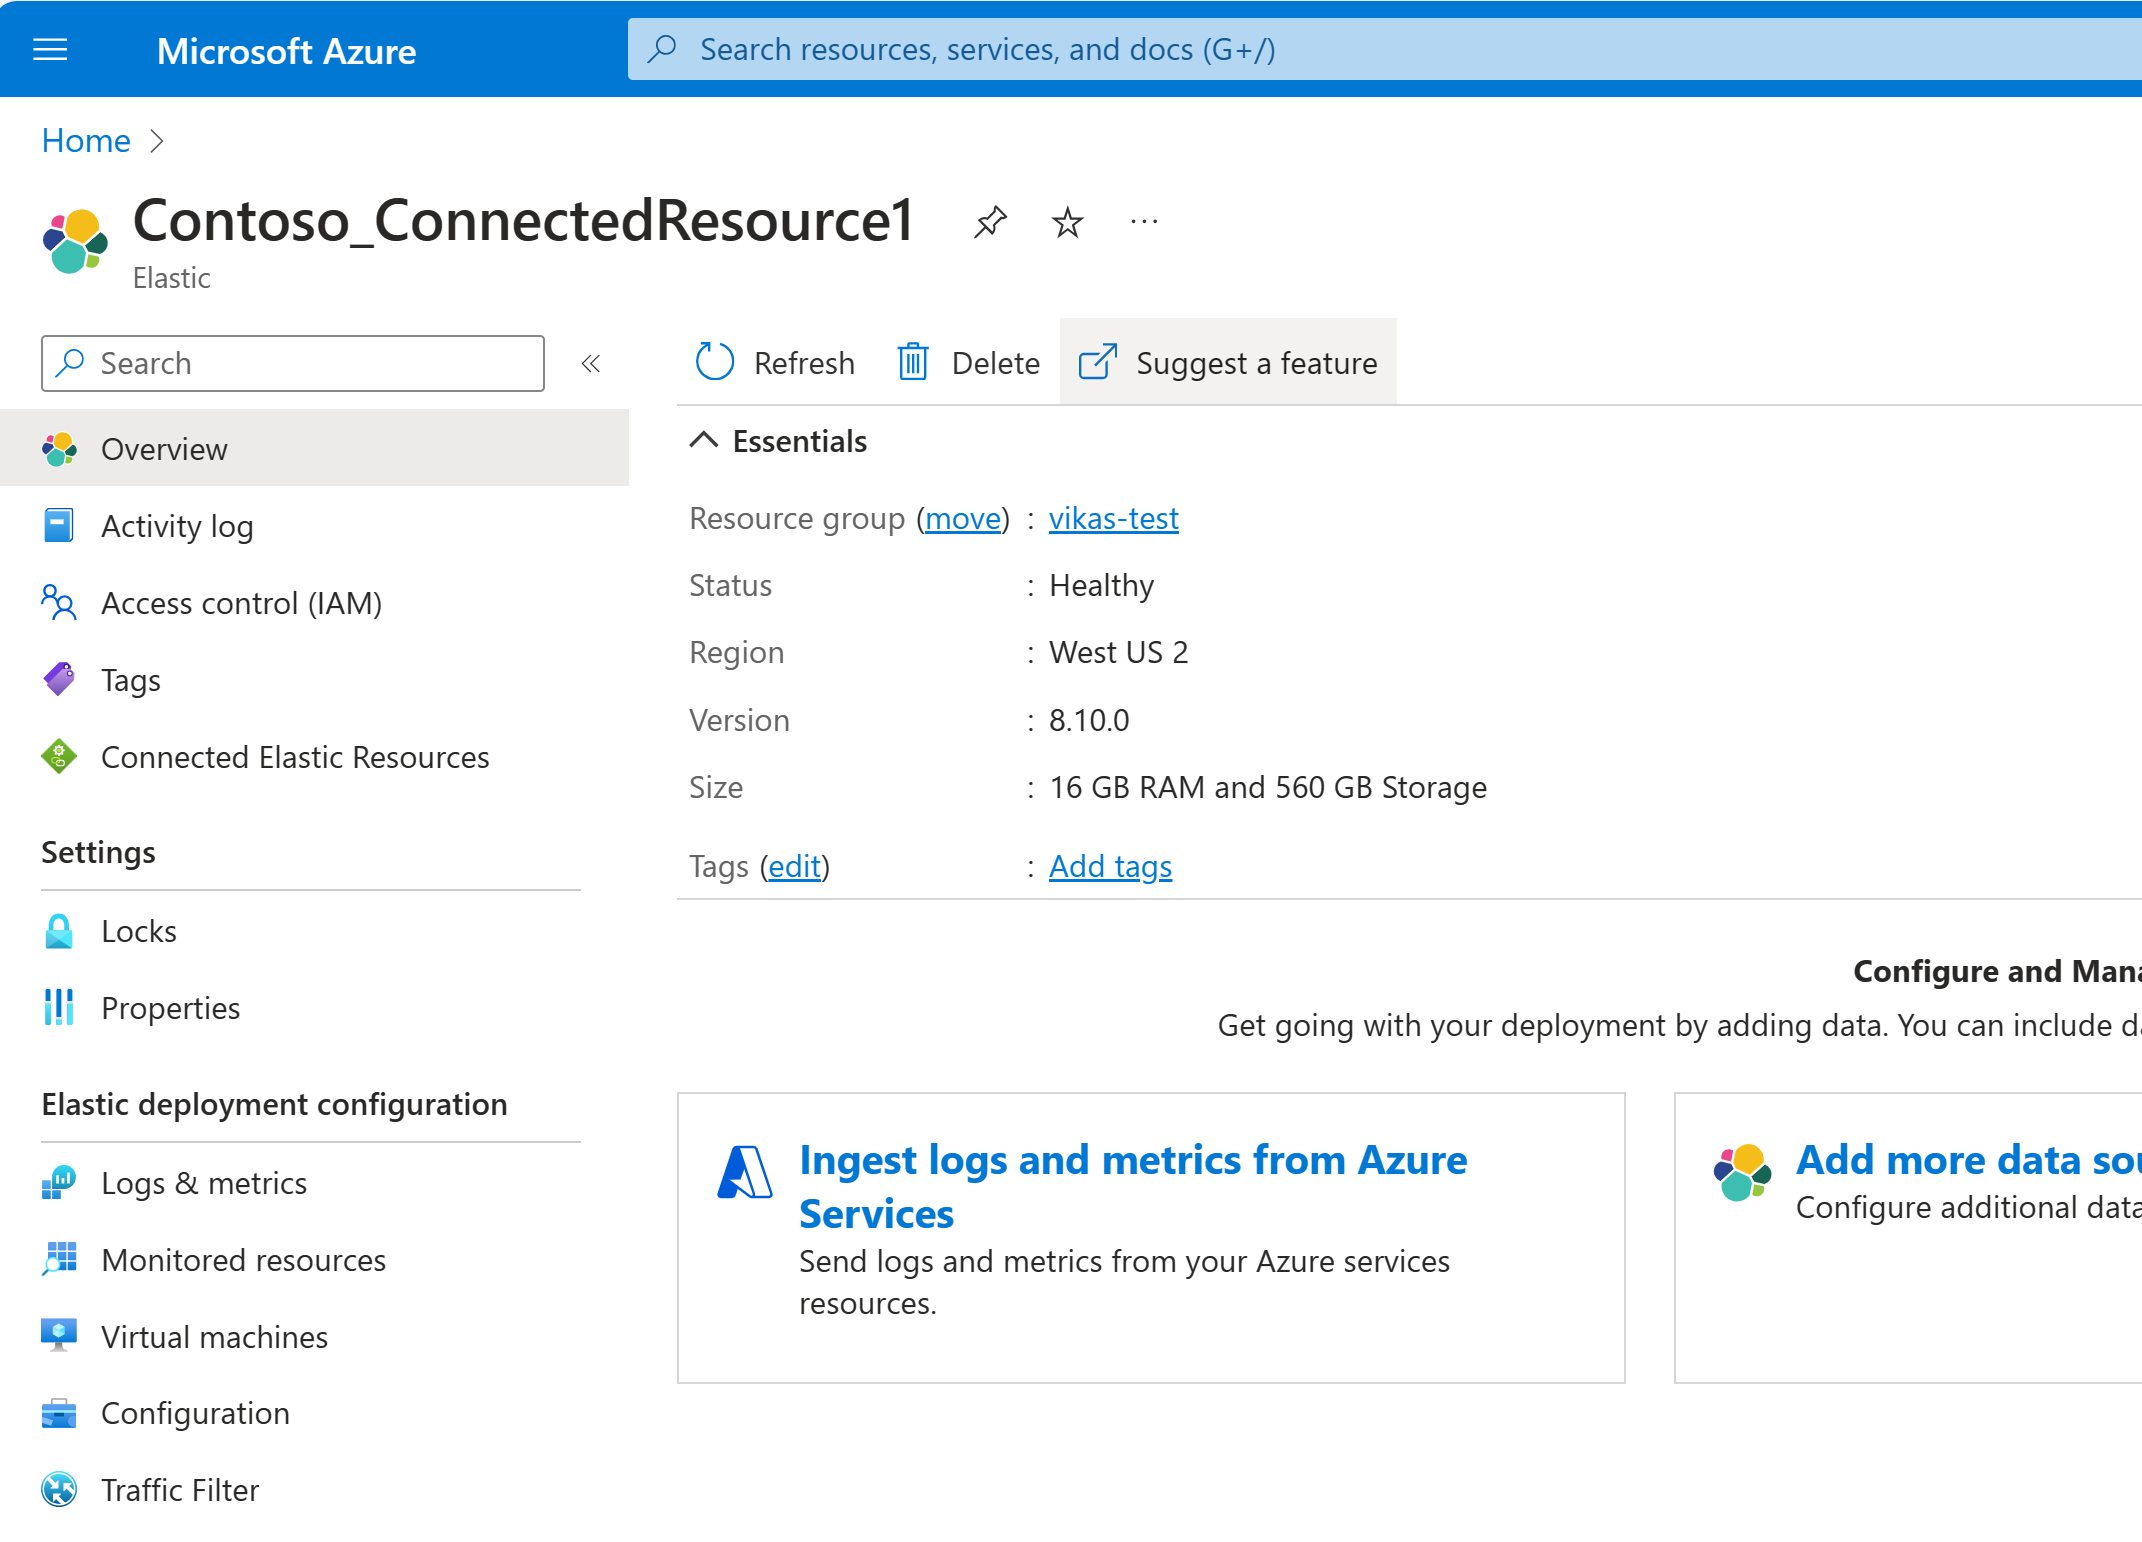 Screenshot of suggesting a feature for the Elastic integration with Azure.